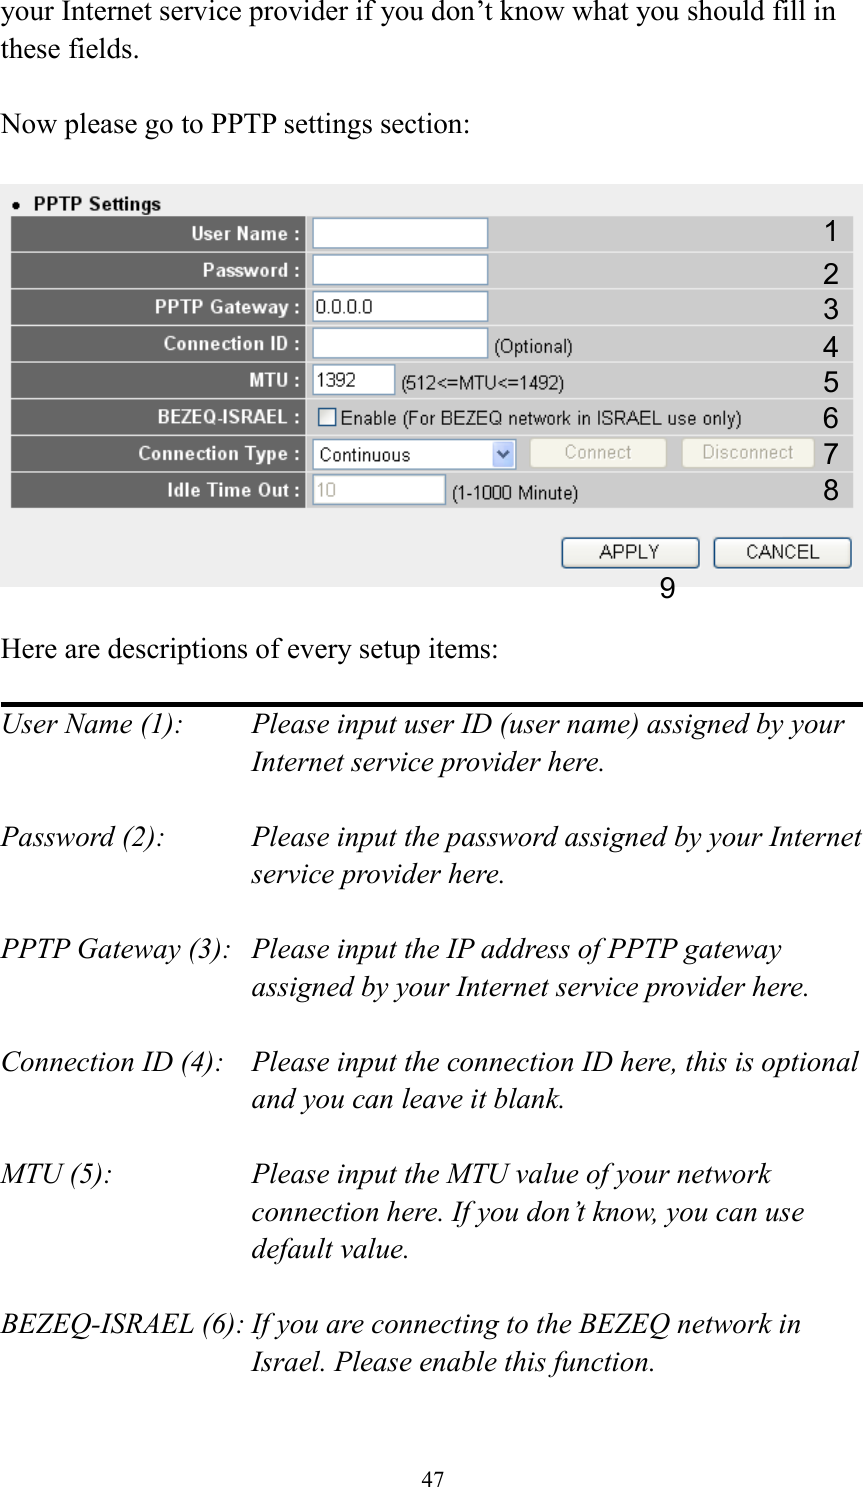 47 your Internet service provider if you don’t know what you should fill in these fields.  Now please go to PPTP settings section:    Here are descriptions of every setup items:  User Name (1):    Please input user ID (user name) assigned by your Internet service provider here.  Password (2):    Please input the password assigned by your Internet service provider here.  PPTP Gateway (3):   Please input the IP address of PPTP gateway assigned by your Internet service provider here.  Connection ID (4):    Please input the connection ID here, this is optional and you can leave it blank.  MTU (5):    Please input the MTU value of your network connection here. If you don’t know, you can use default value.  BEZEQ-ISRAEL (6): If you are connecting to the BEZEQ network in Israel. Please enable this function.  1 2 3 4 5 7 8 9 6 